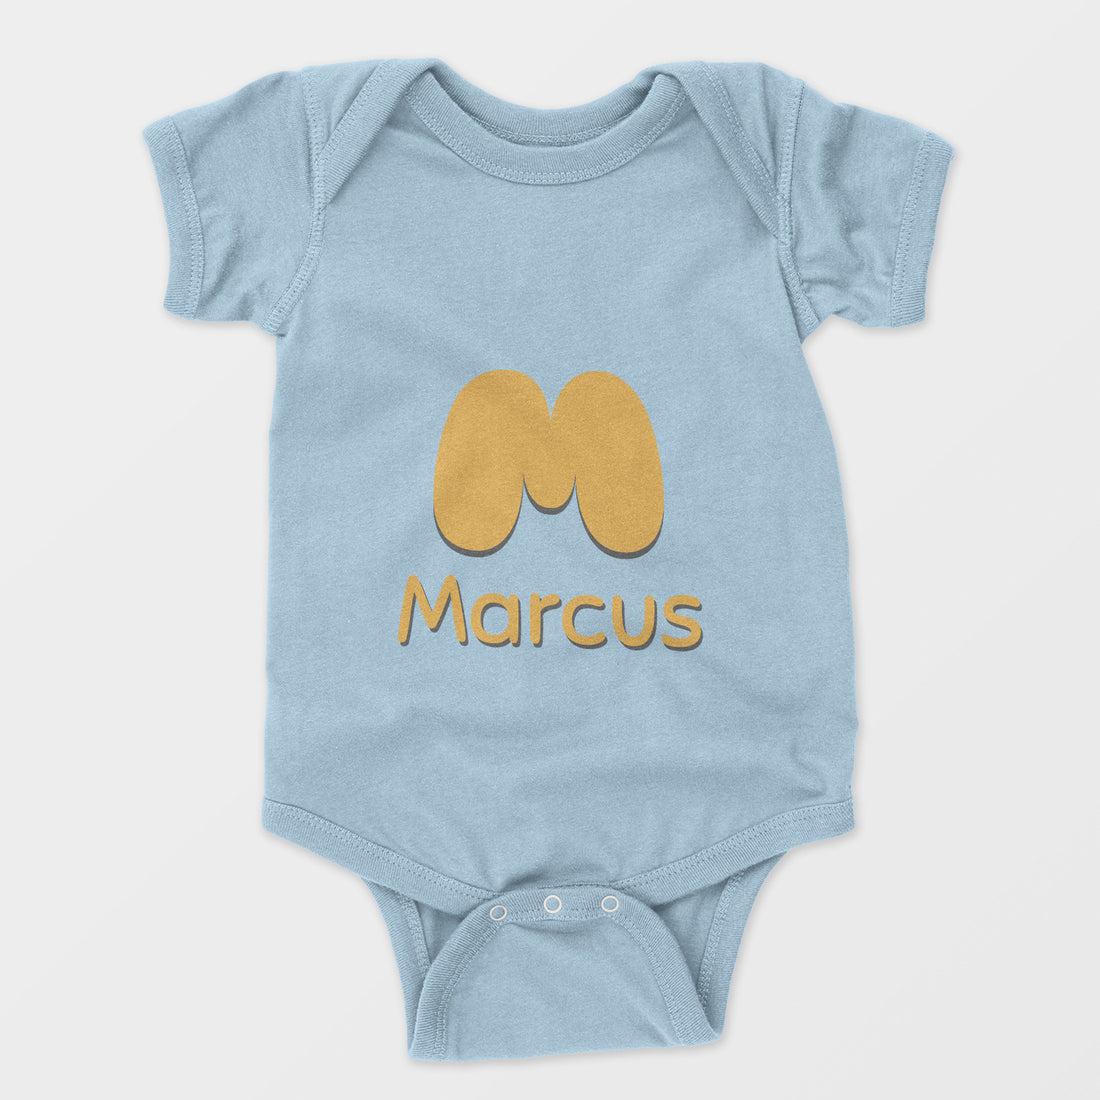 Personalized Baby Bodysuit Onesie For Newborn With Name And Initial